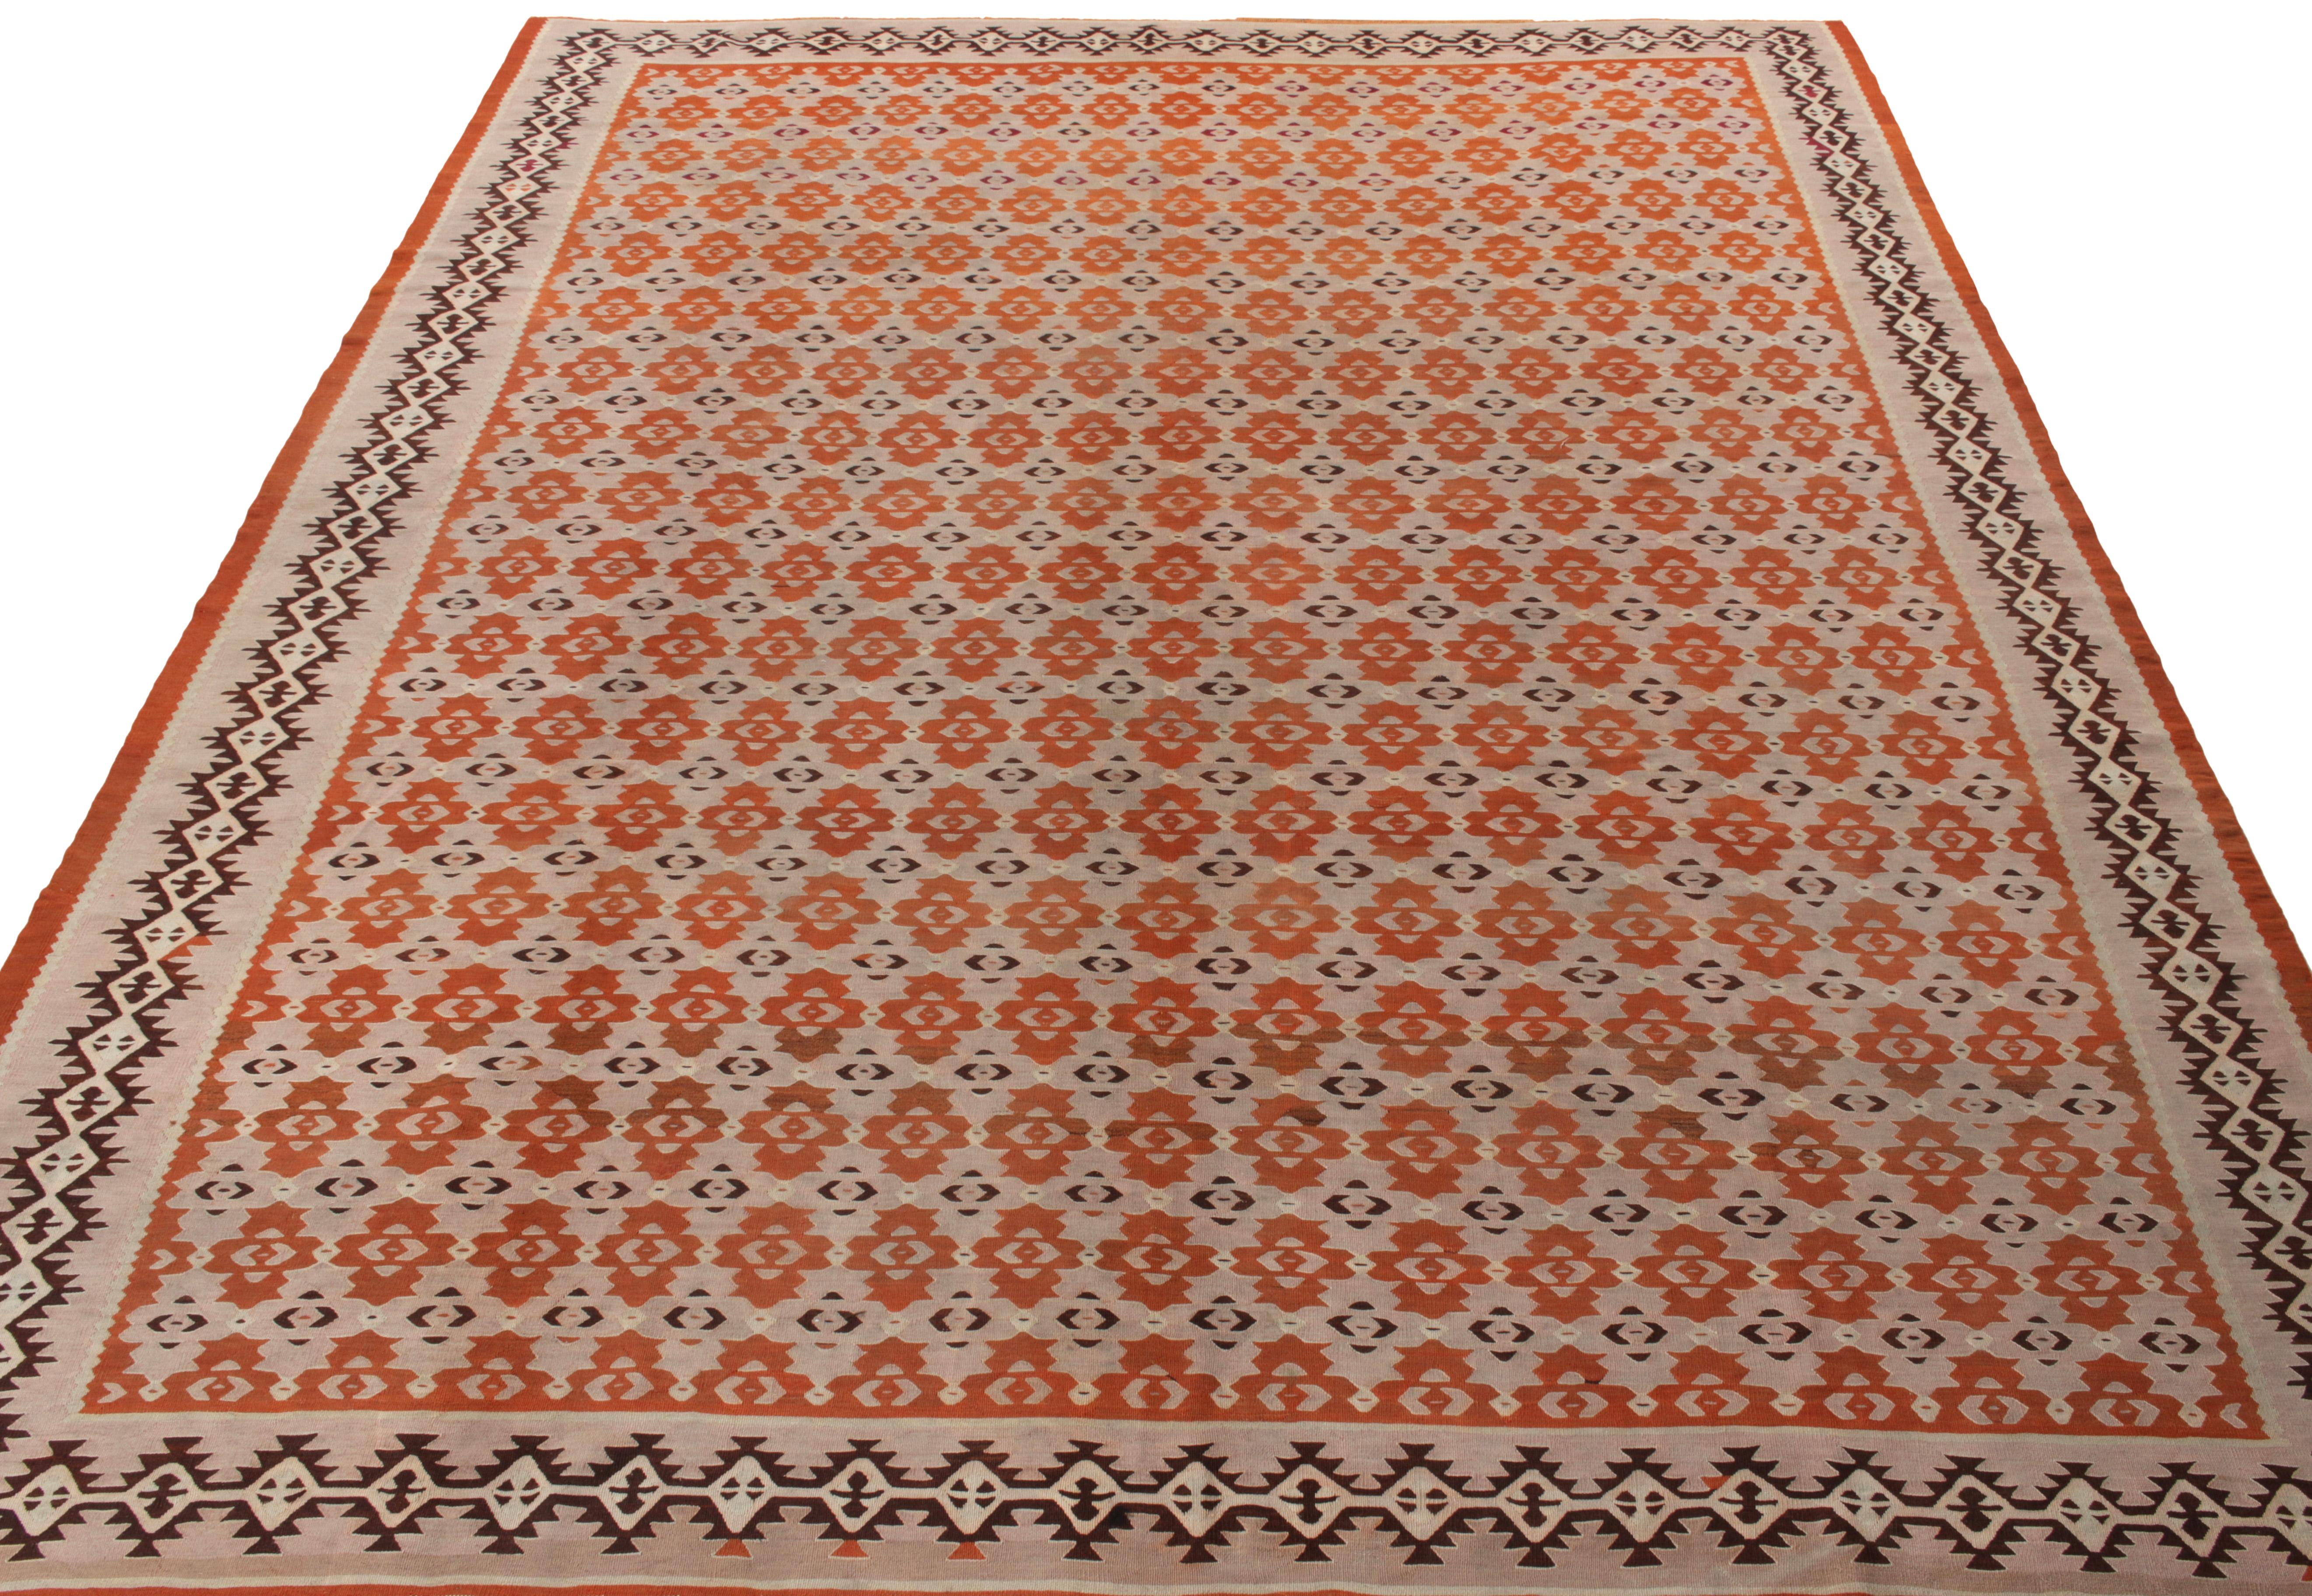 A 9x11 handwoven wool vintage kilim rug from Turkey circa 1950-1960, amongst Rug & Kilim’s fine selections of flatweaves. The luscious creamy pink scale grounds the meticulous tangerine orange geometric pattern for a scintillating sense of